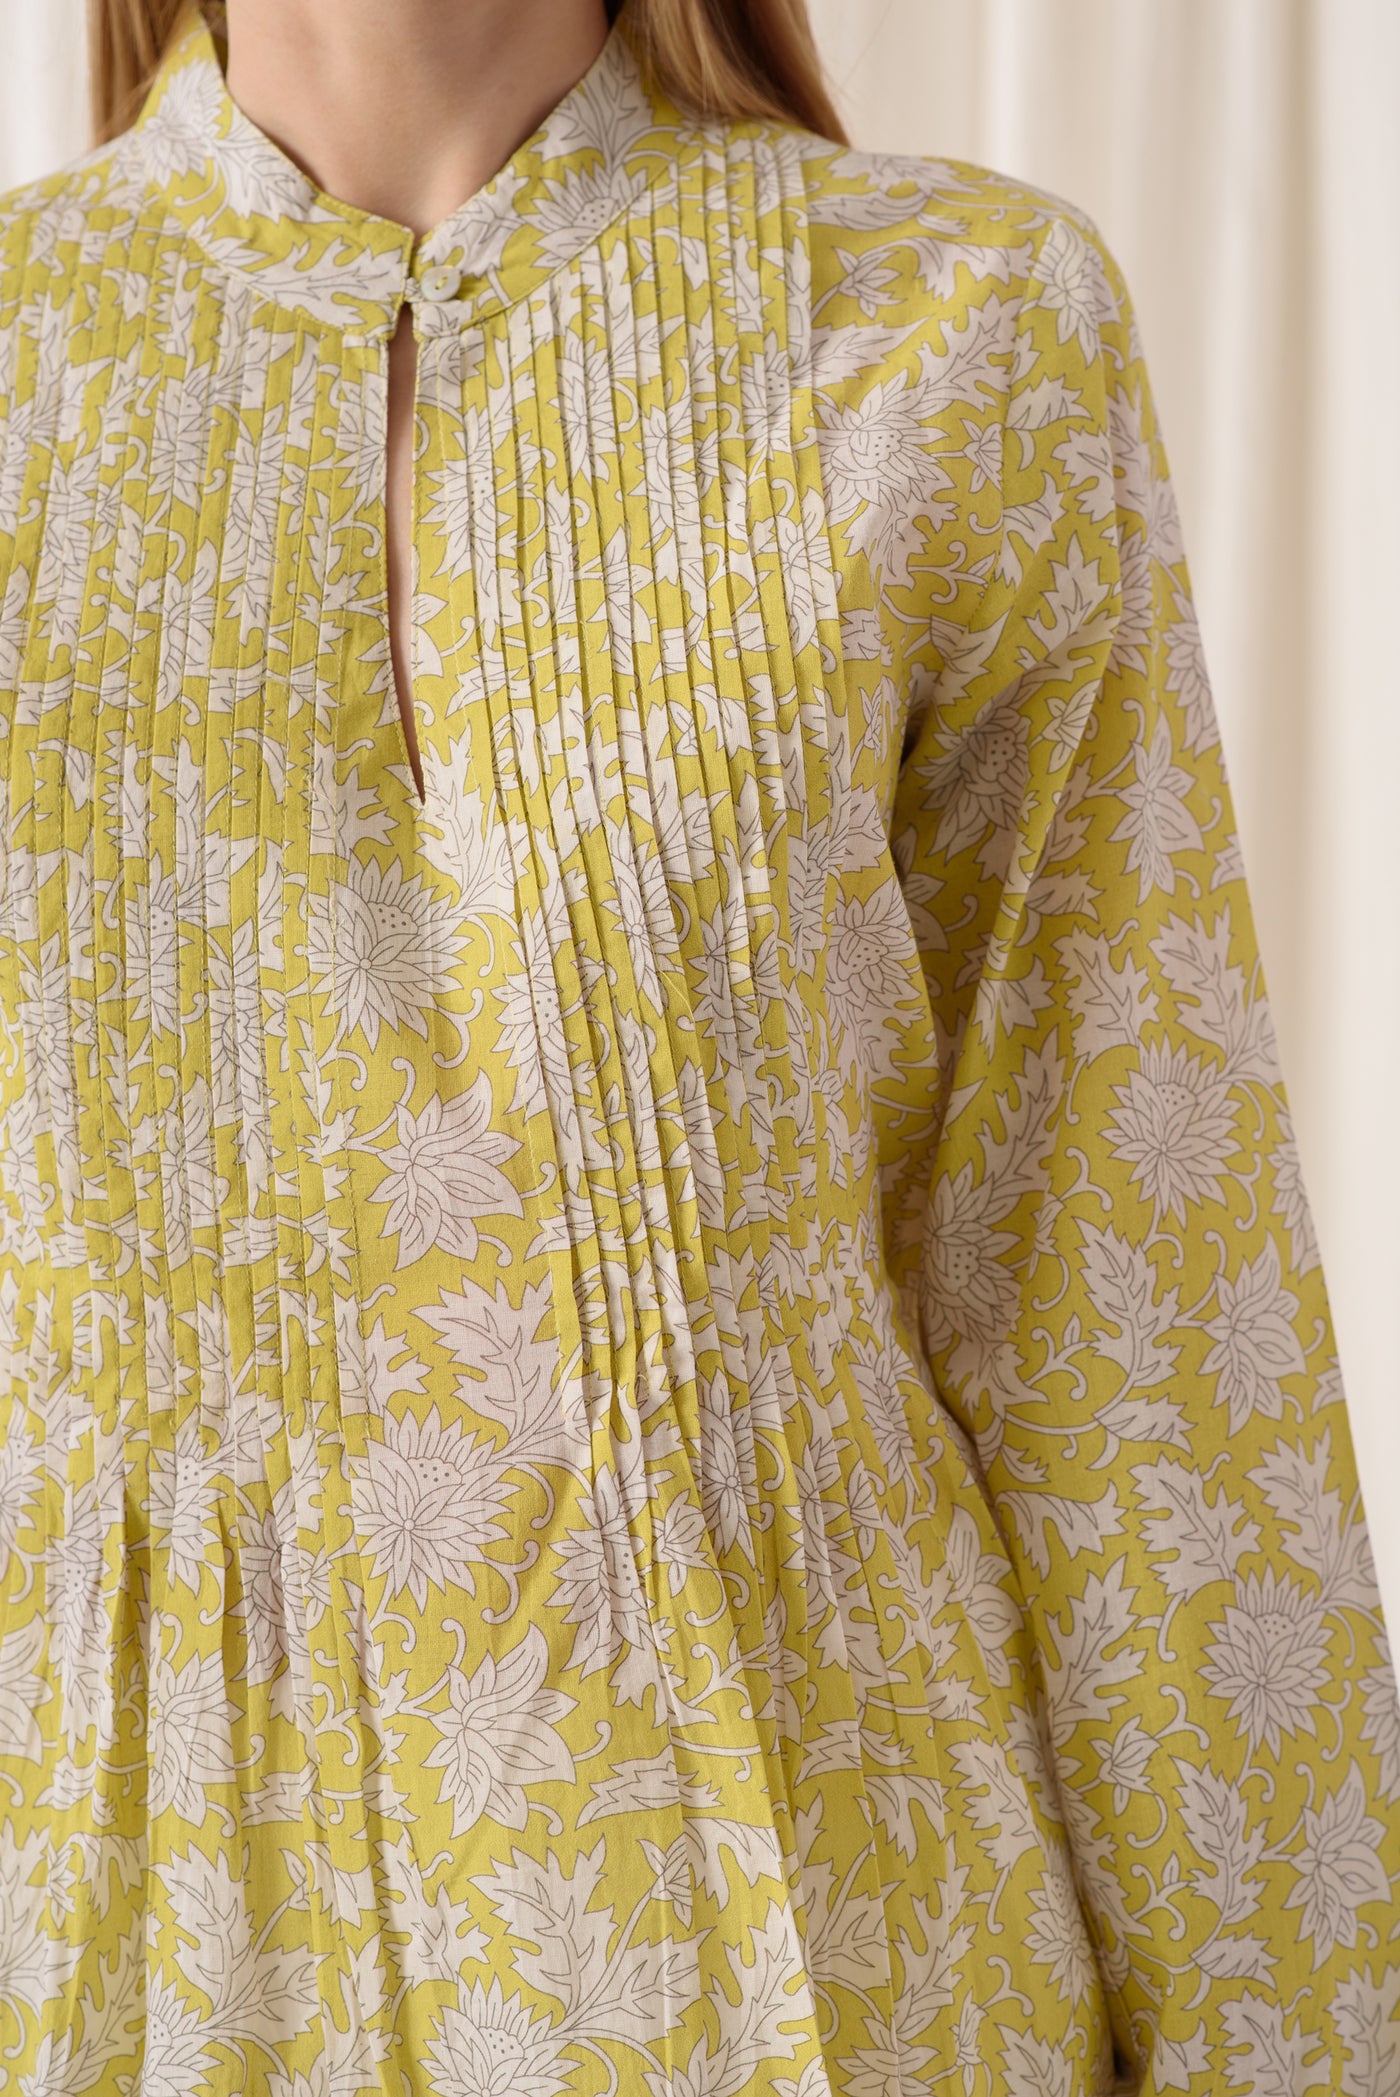 THE PLEATED TOP IN SUNNY YELLOW